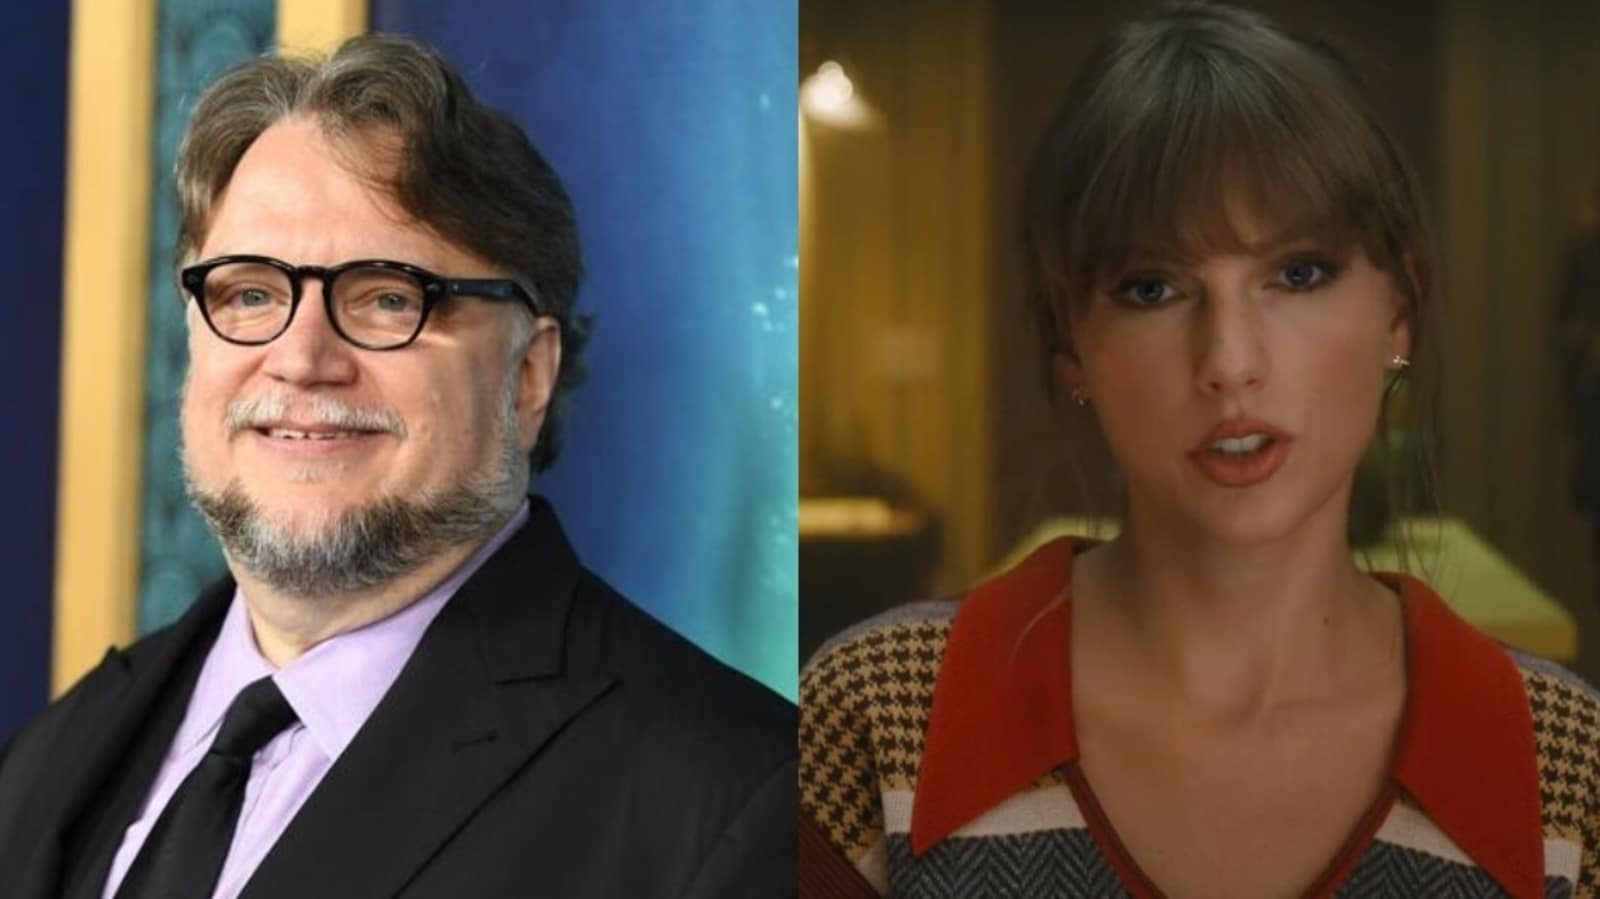 Guillermo del Toro calls Taylor Swift ‘accomplished director’ amid criticism: ‘I have the greatest admiration for her’